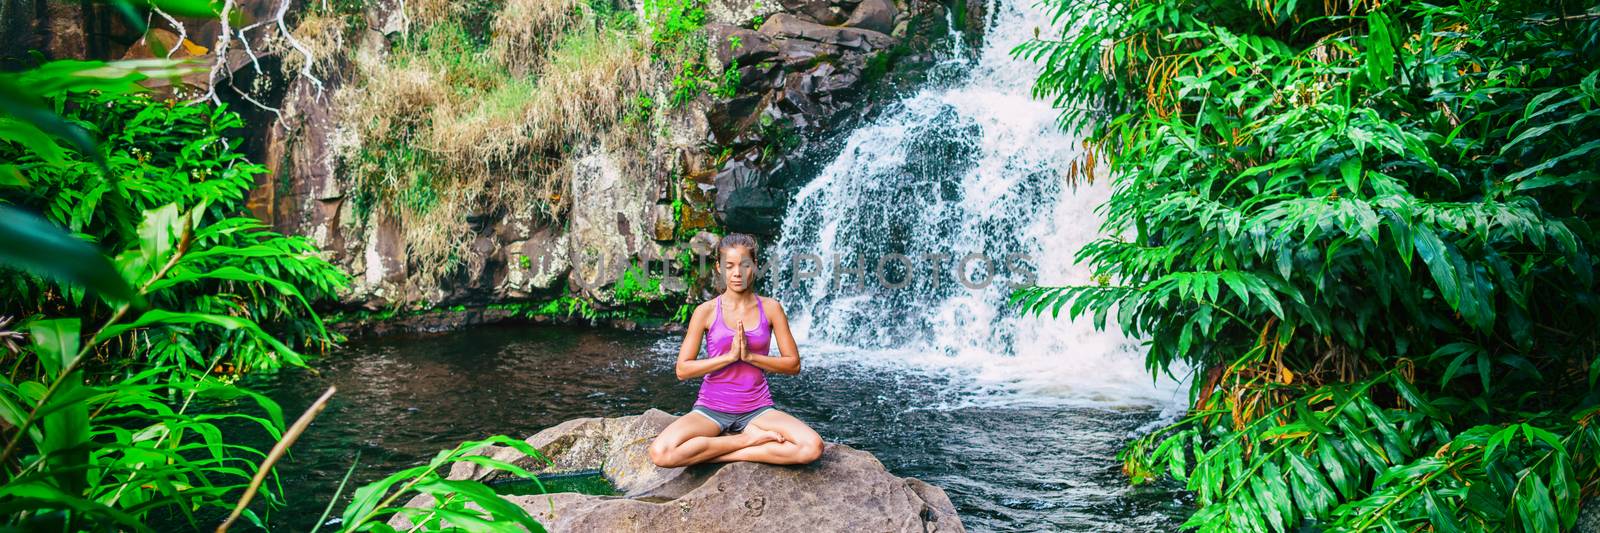 Wellness yoga woman practicing meditation in nature by watefall and lush forest. Banner panorama of health and fitness, mindfulness concept by Maridav